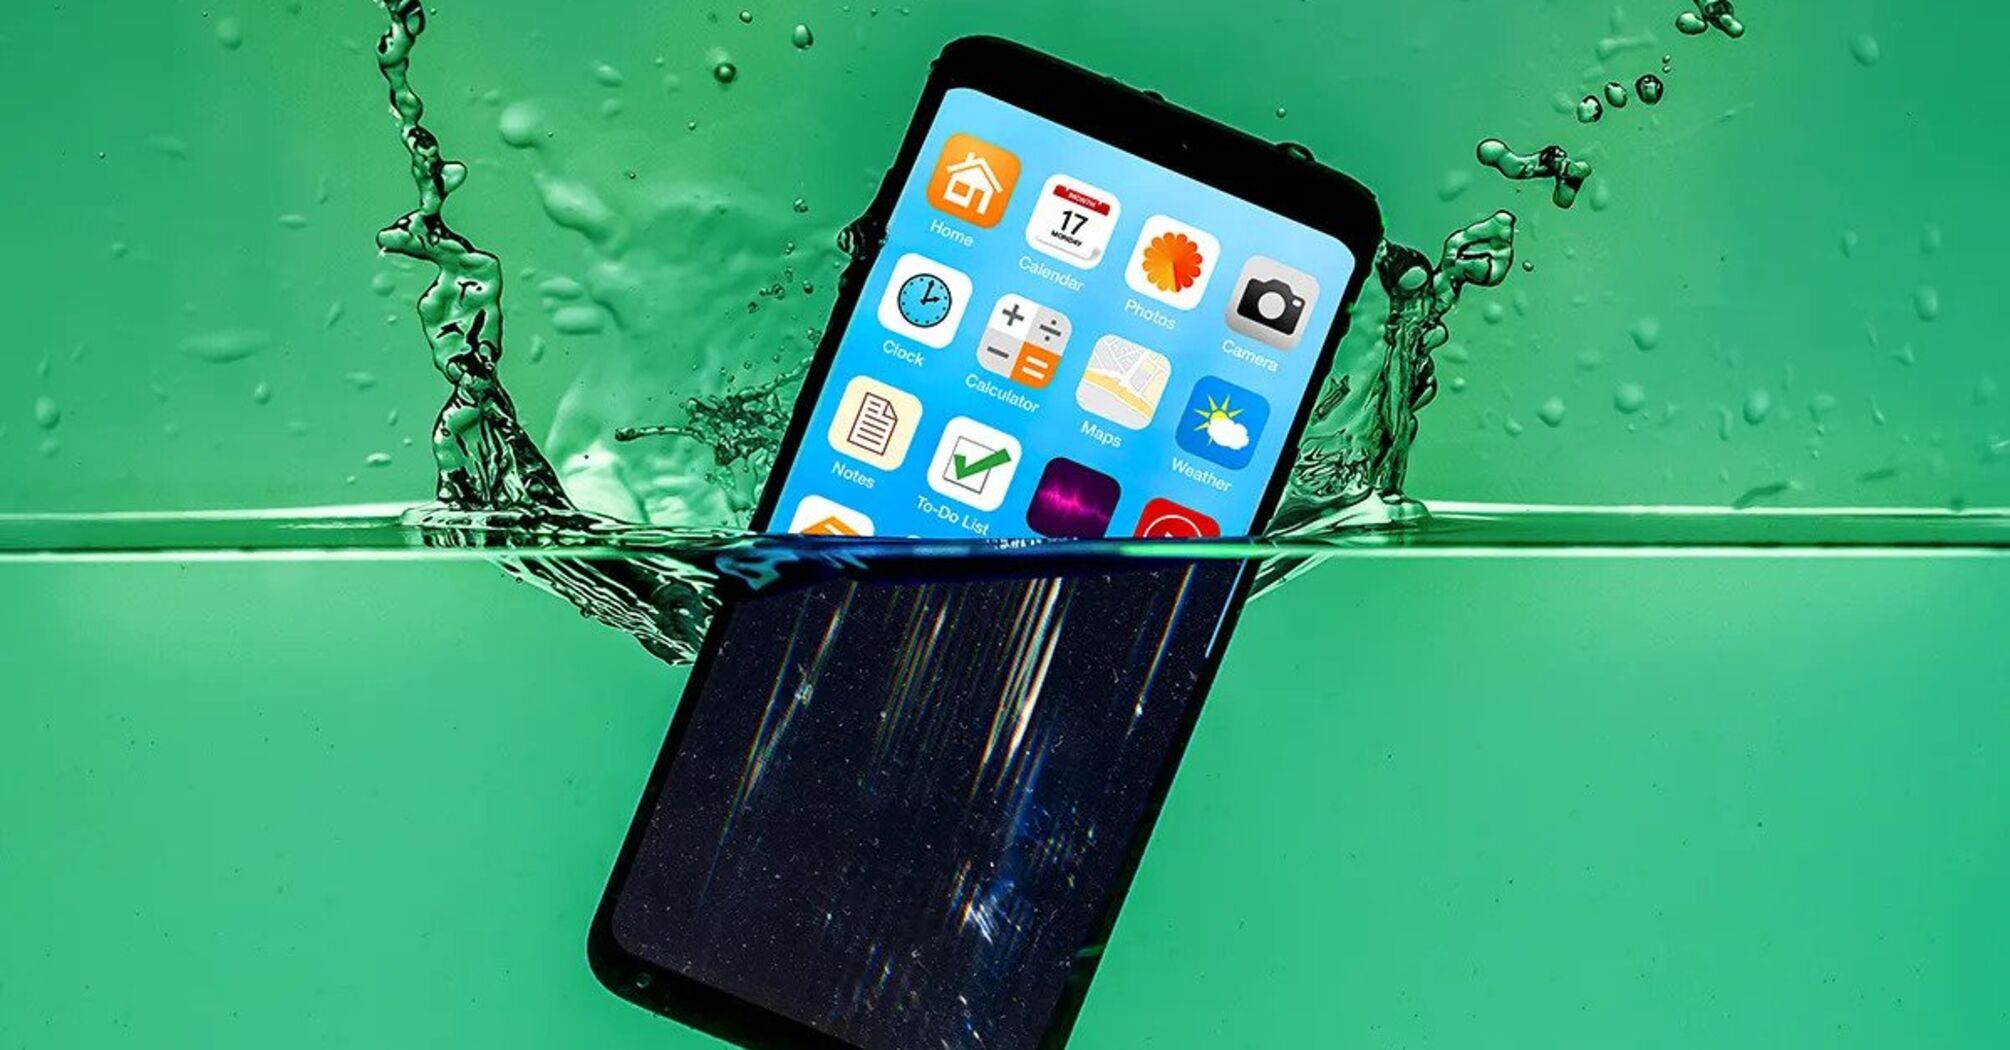 What to do if your phone gets into the water